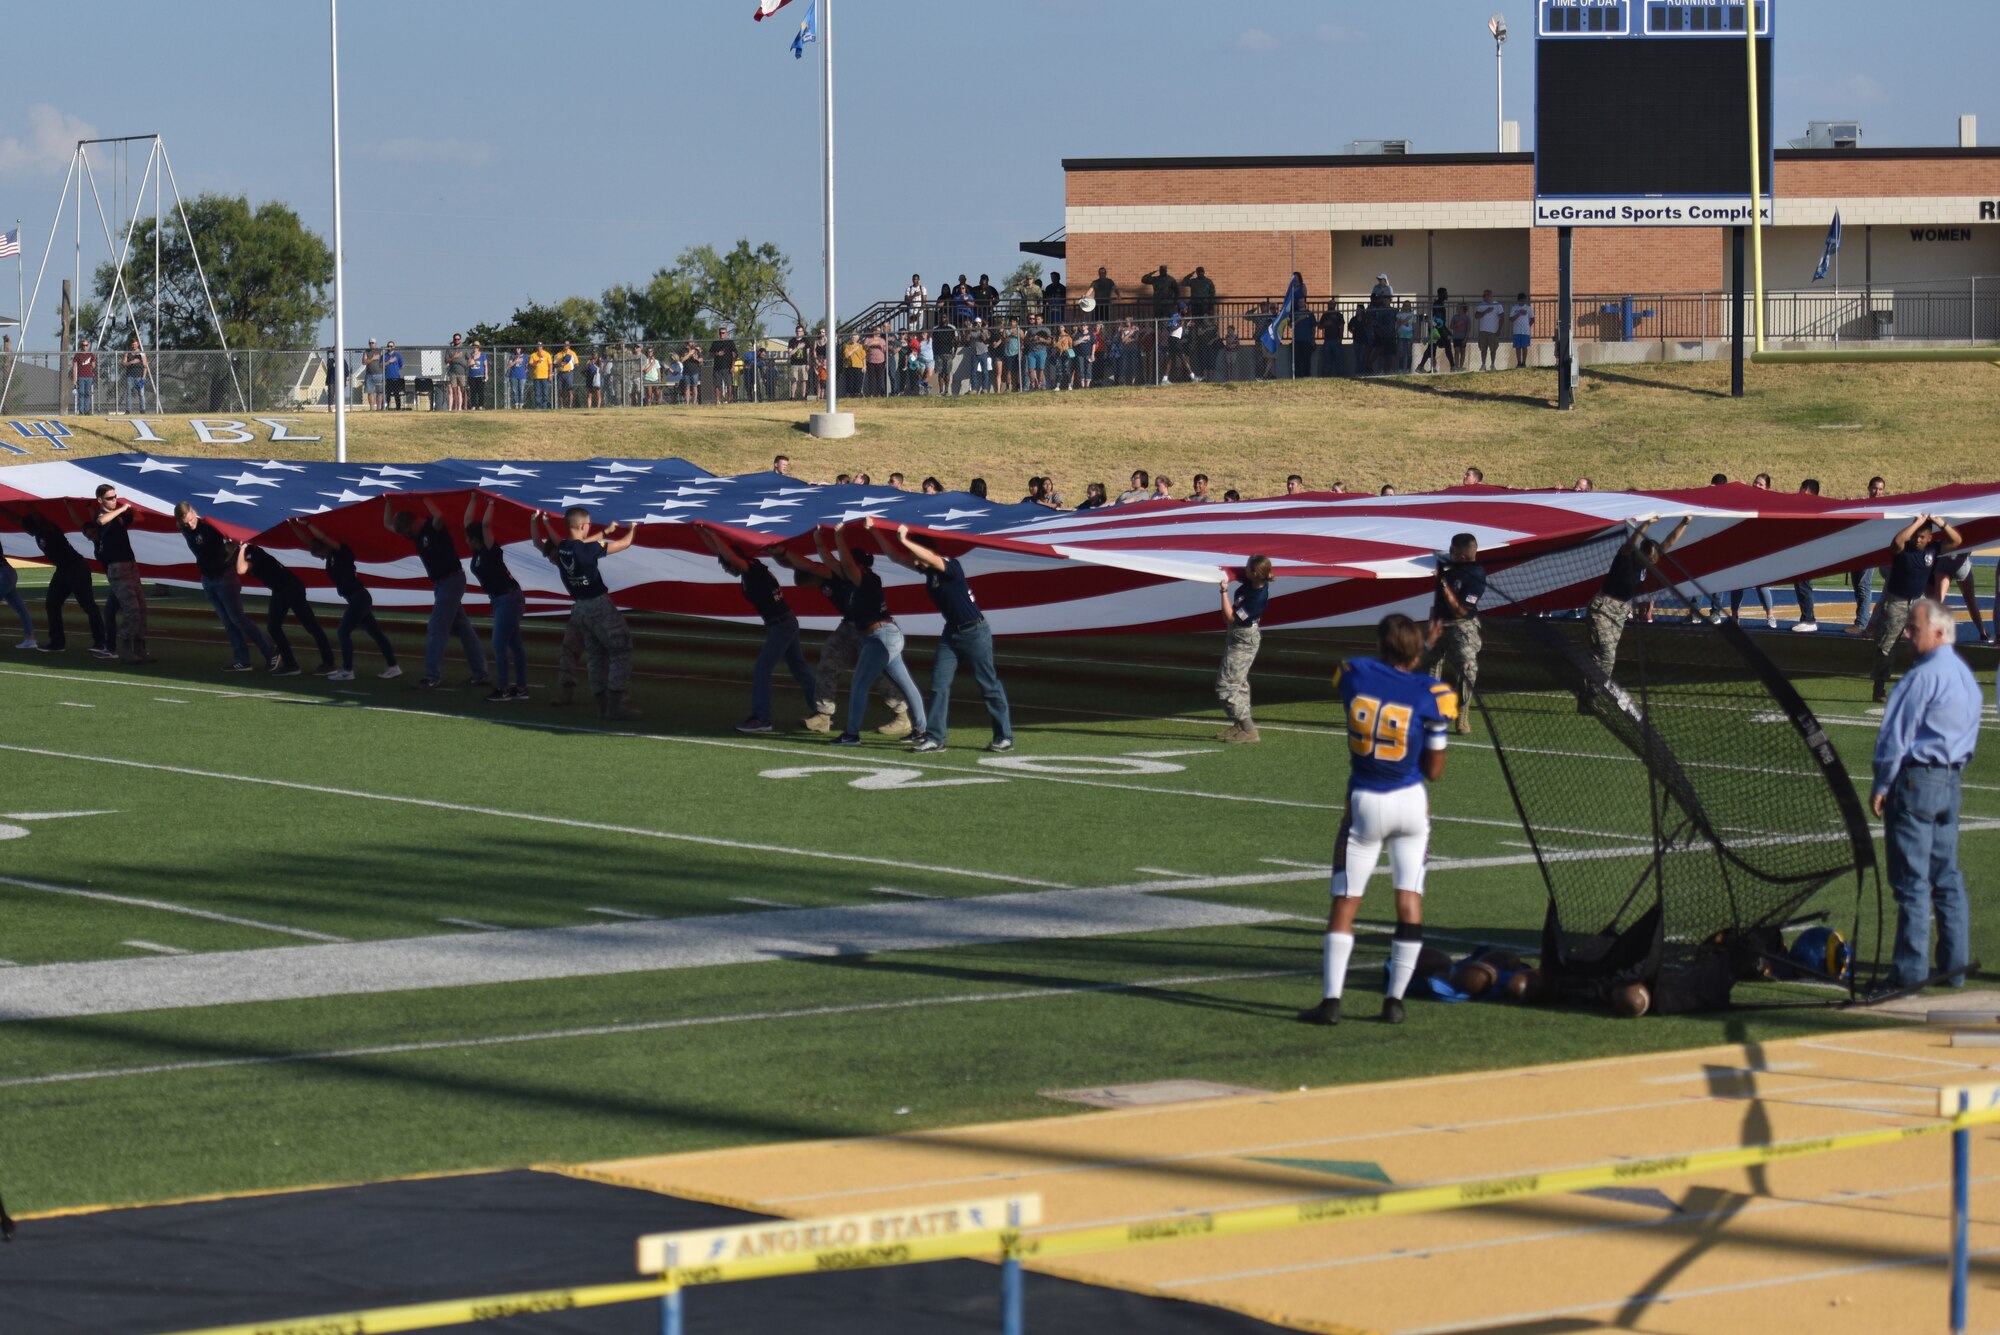 Angelo State University Reserve Officer Training Corps cadets display a flag during the singing of the National Anthem to begin the ASU vs Simon Fraser University game at 1st Community Credit Union Field, San Angelo Texas, Sept. 14, 2019. ROTC is a college and university based program for training cadets to commission into the U.S. Armed Forces. (U.S. Air Force photo by Senior Airman Seraiah Wolf/Released)